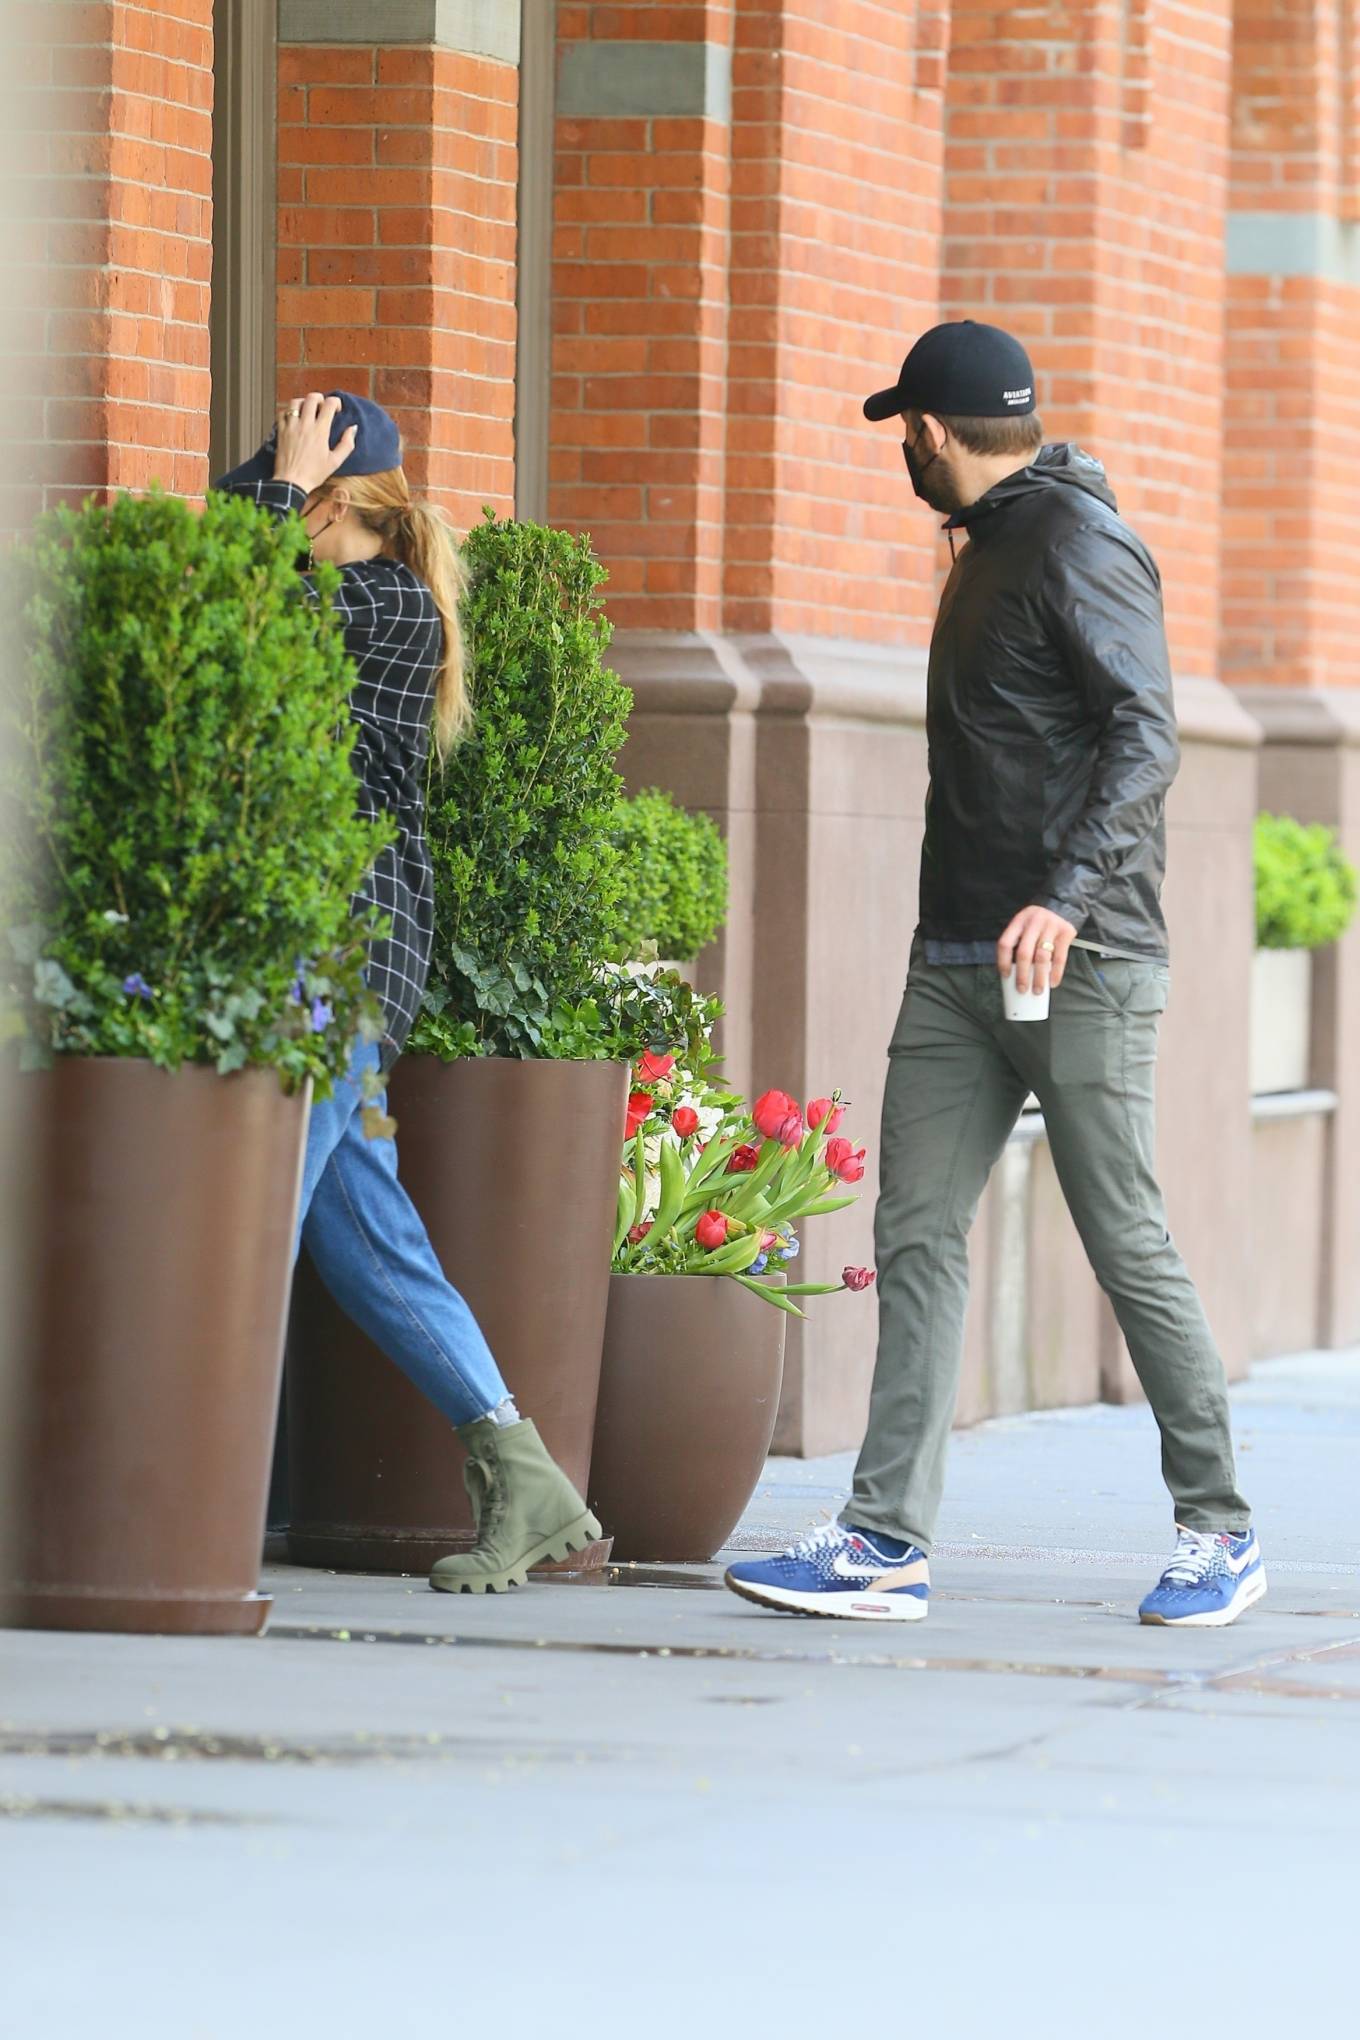 https://www.gotceleb.com/wp-content/uploads/photos/blake-lively/with-ryan-reynolds-return-to-their-apartment-with-coffee-in-new-york/Blake-Lively---With-Ryan-Reynolds-return-to-their-apartment-with-coffee-in-New-York-01.jpg